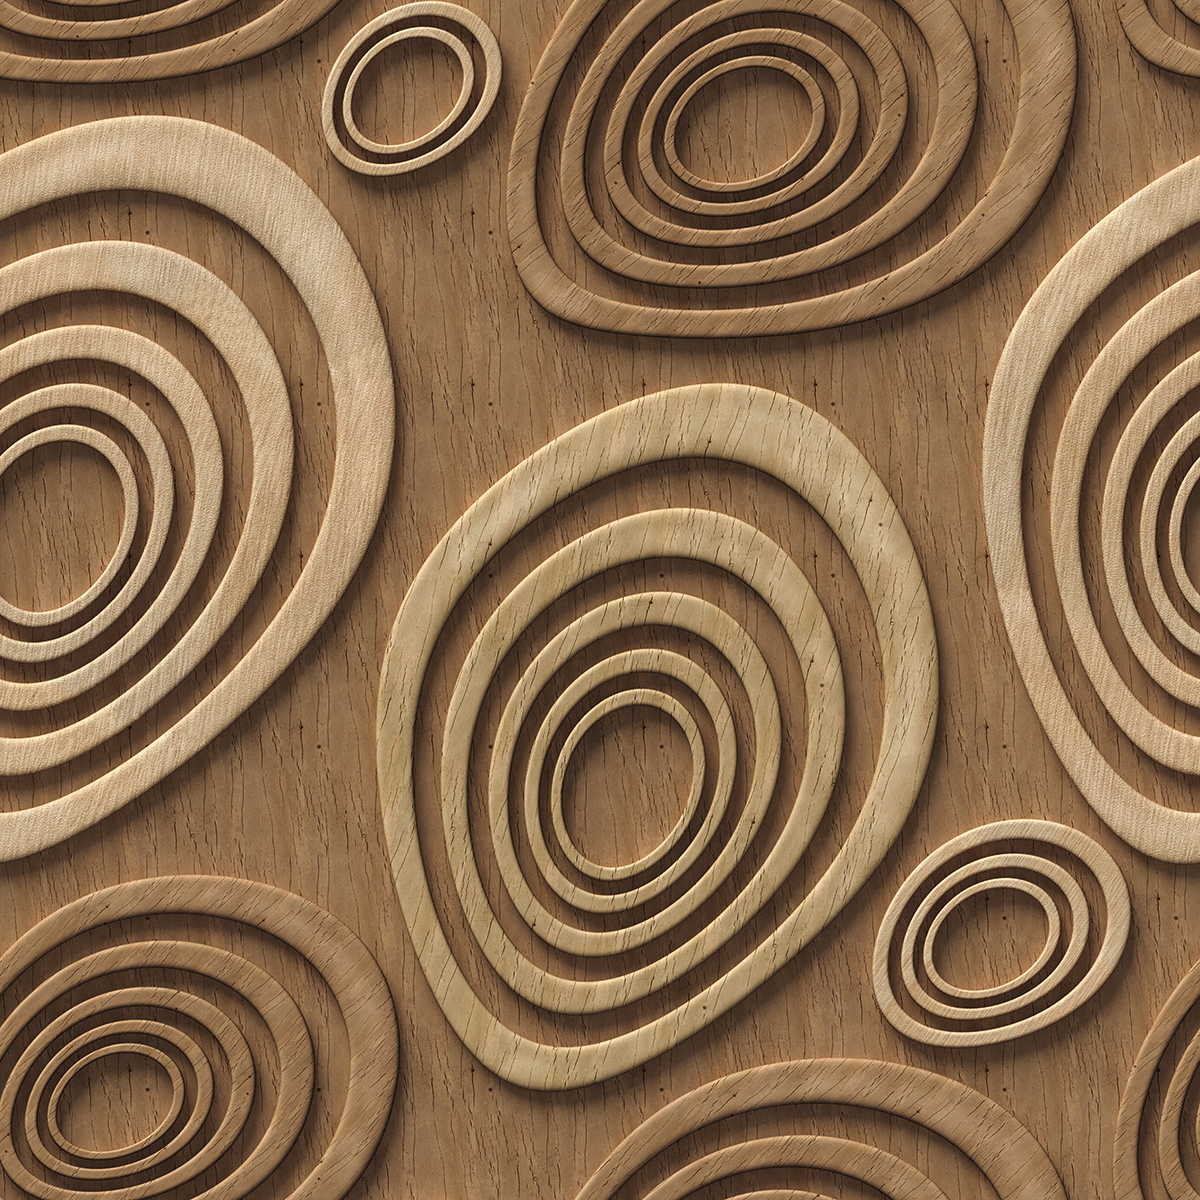 A wood surface with circles carved into it